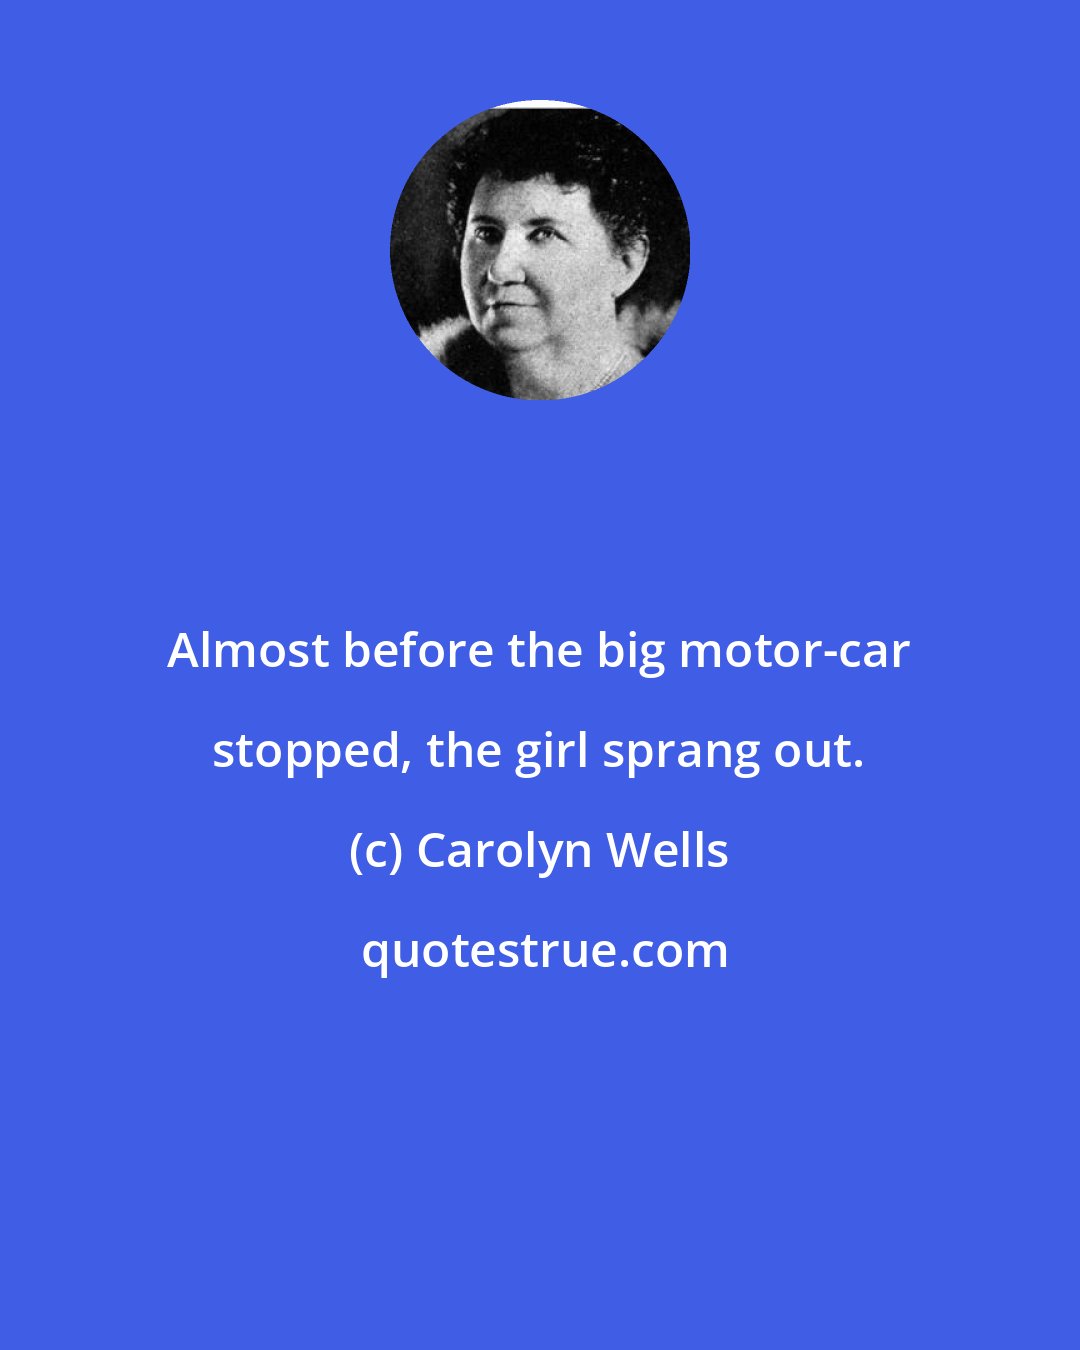 Carolyn Wells: Almost before the big motor-car stopped, the girl sprang out.